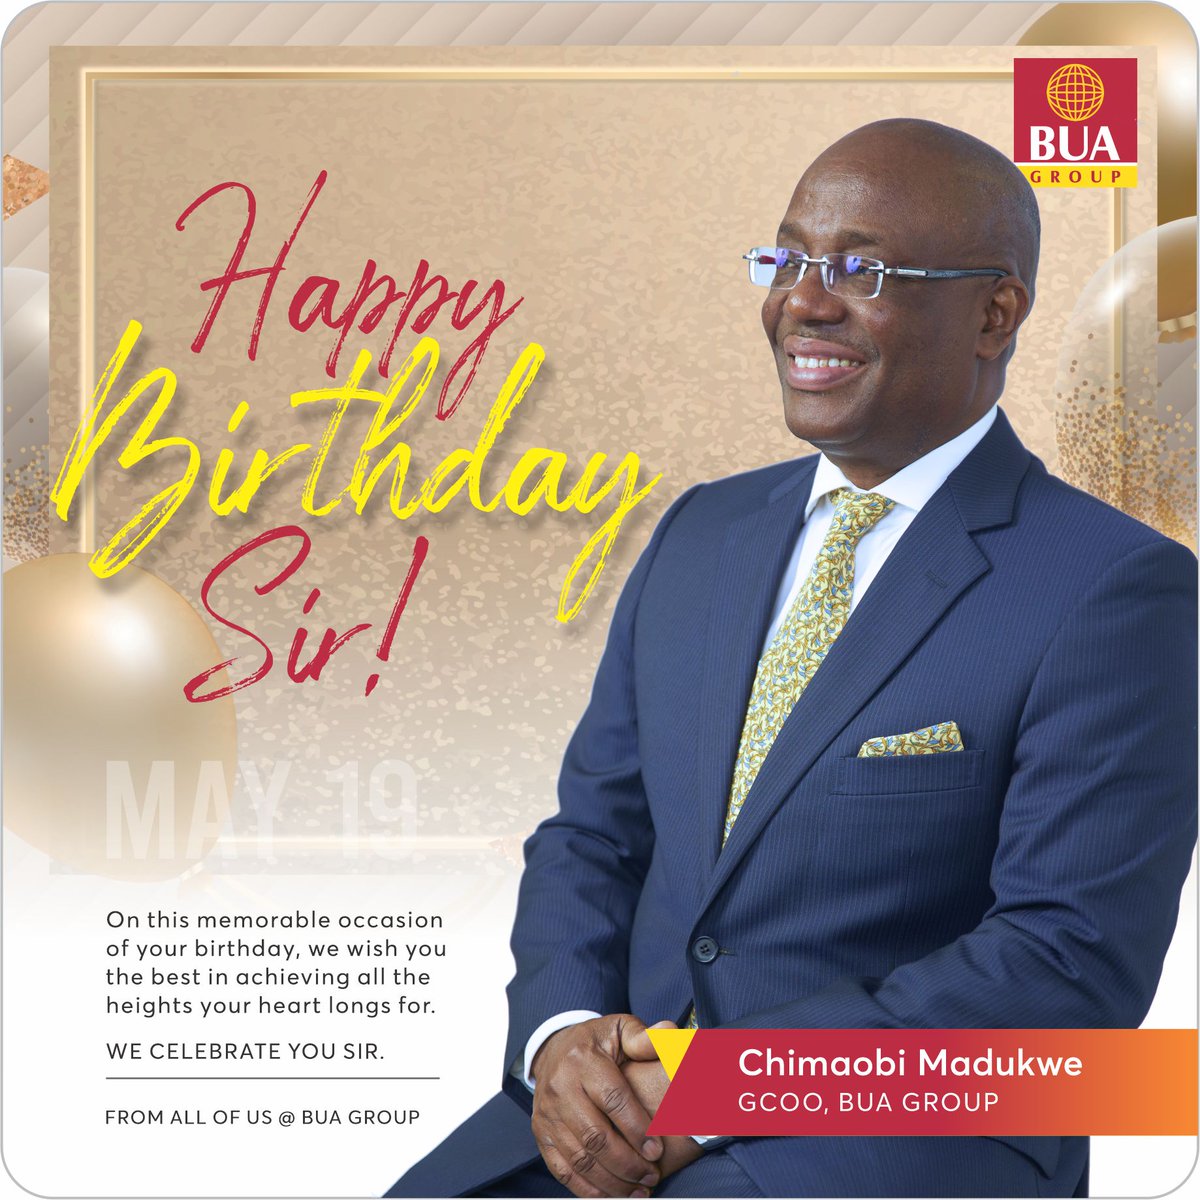 On this memorable occasion of your birthday, we wish you the best in achieving all the heights your heart longs for. We celebrate you Sir. Happy Birthday from all of us at BUA Group. #BUAGroup #UnlockingOpportunities